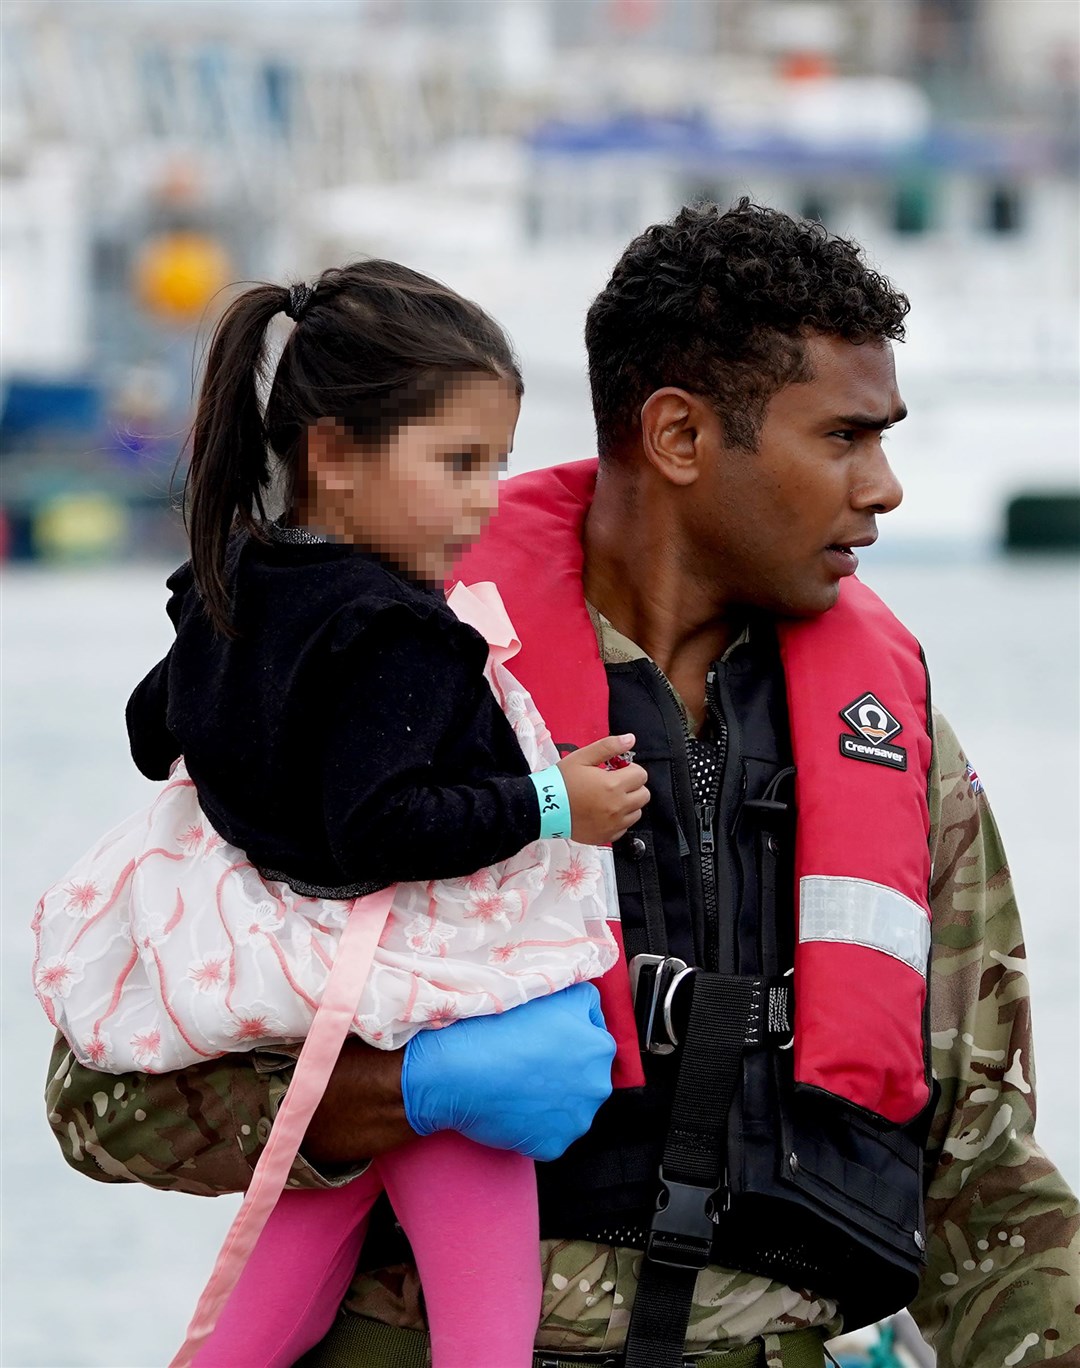 More than 15,000 migrants have arrived in the UK this year after crossing the Channel (Gareth Fuller/PA)